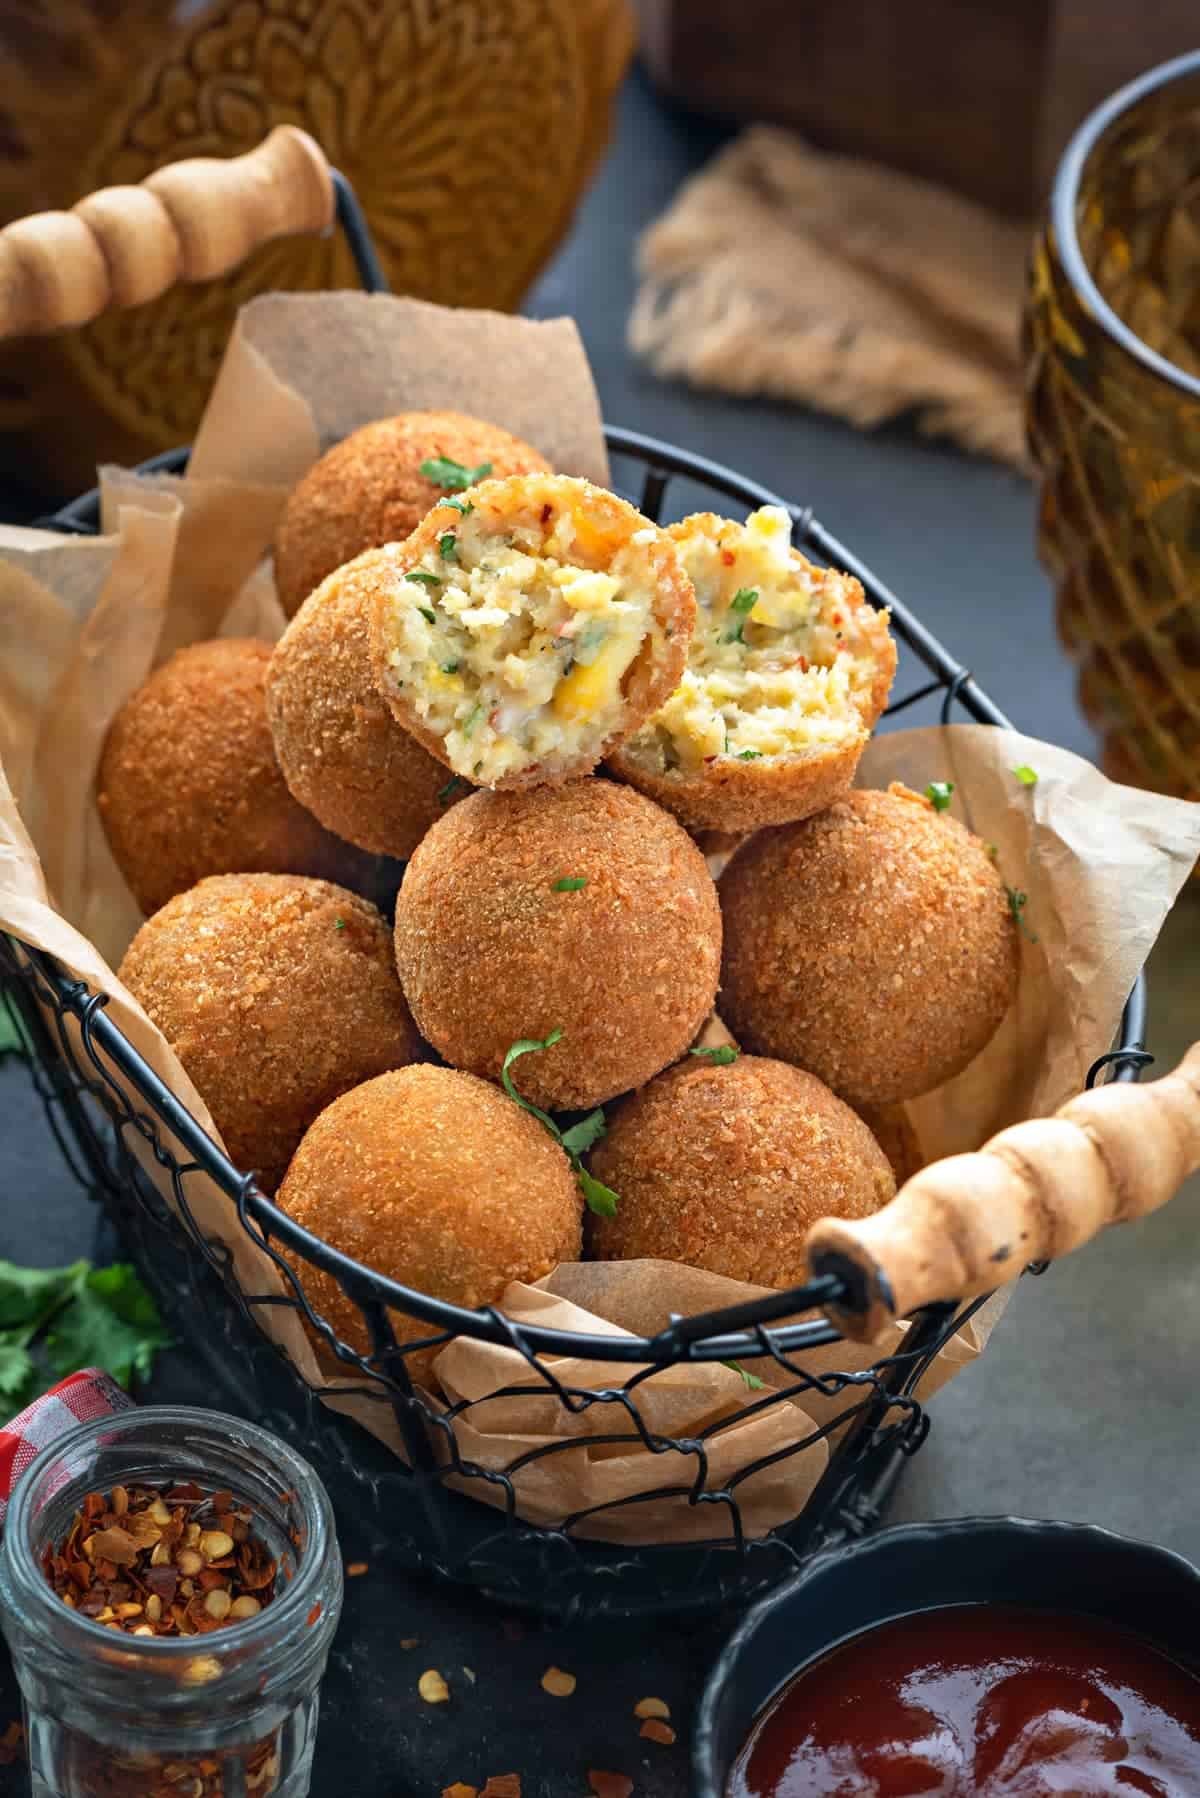 Corn cheese balls served in basket with one ball cut open showing the texture inside.